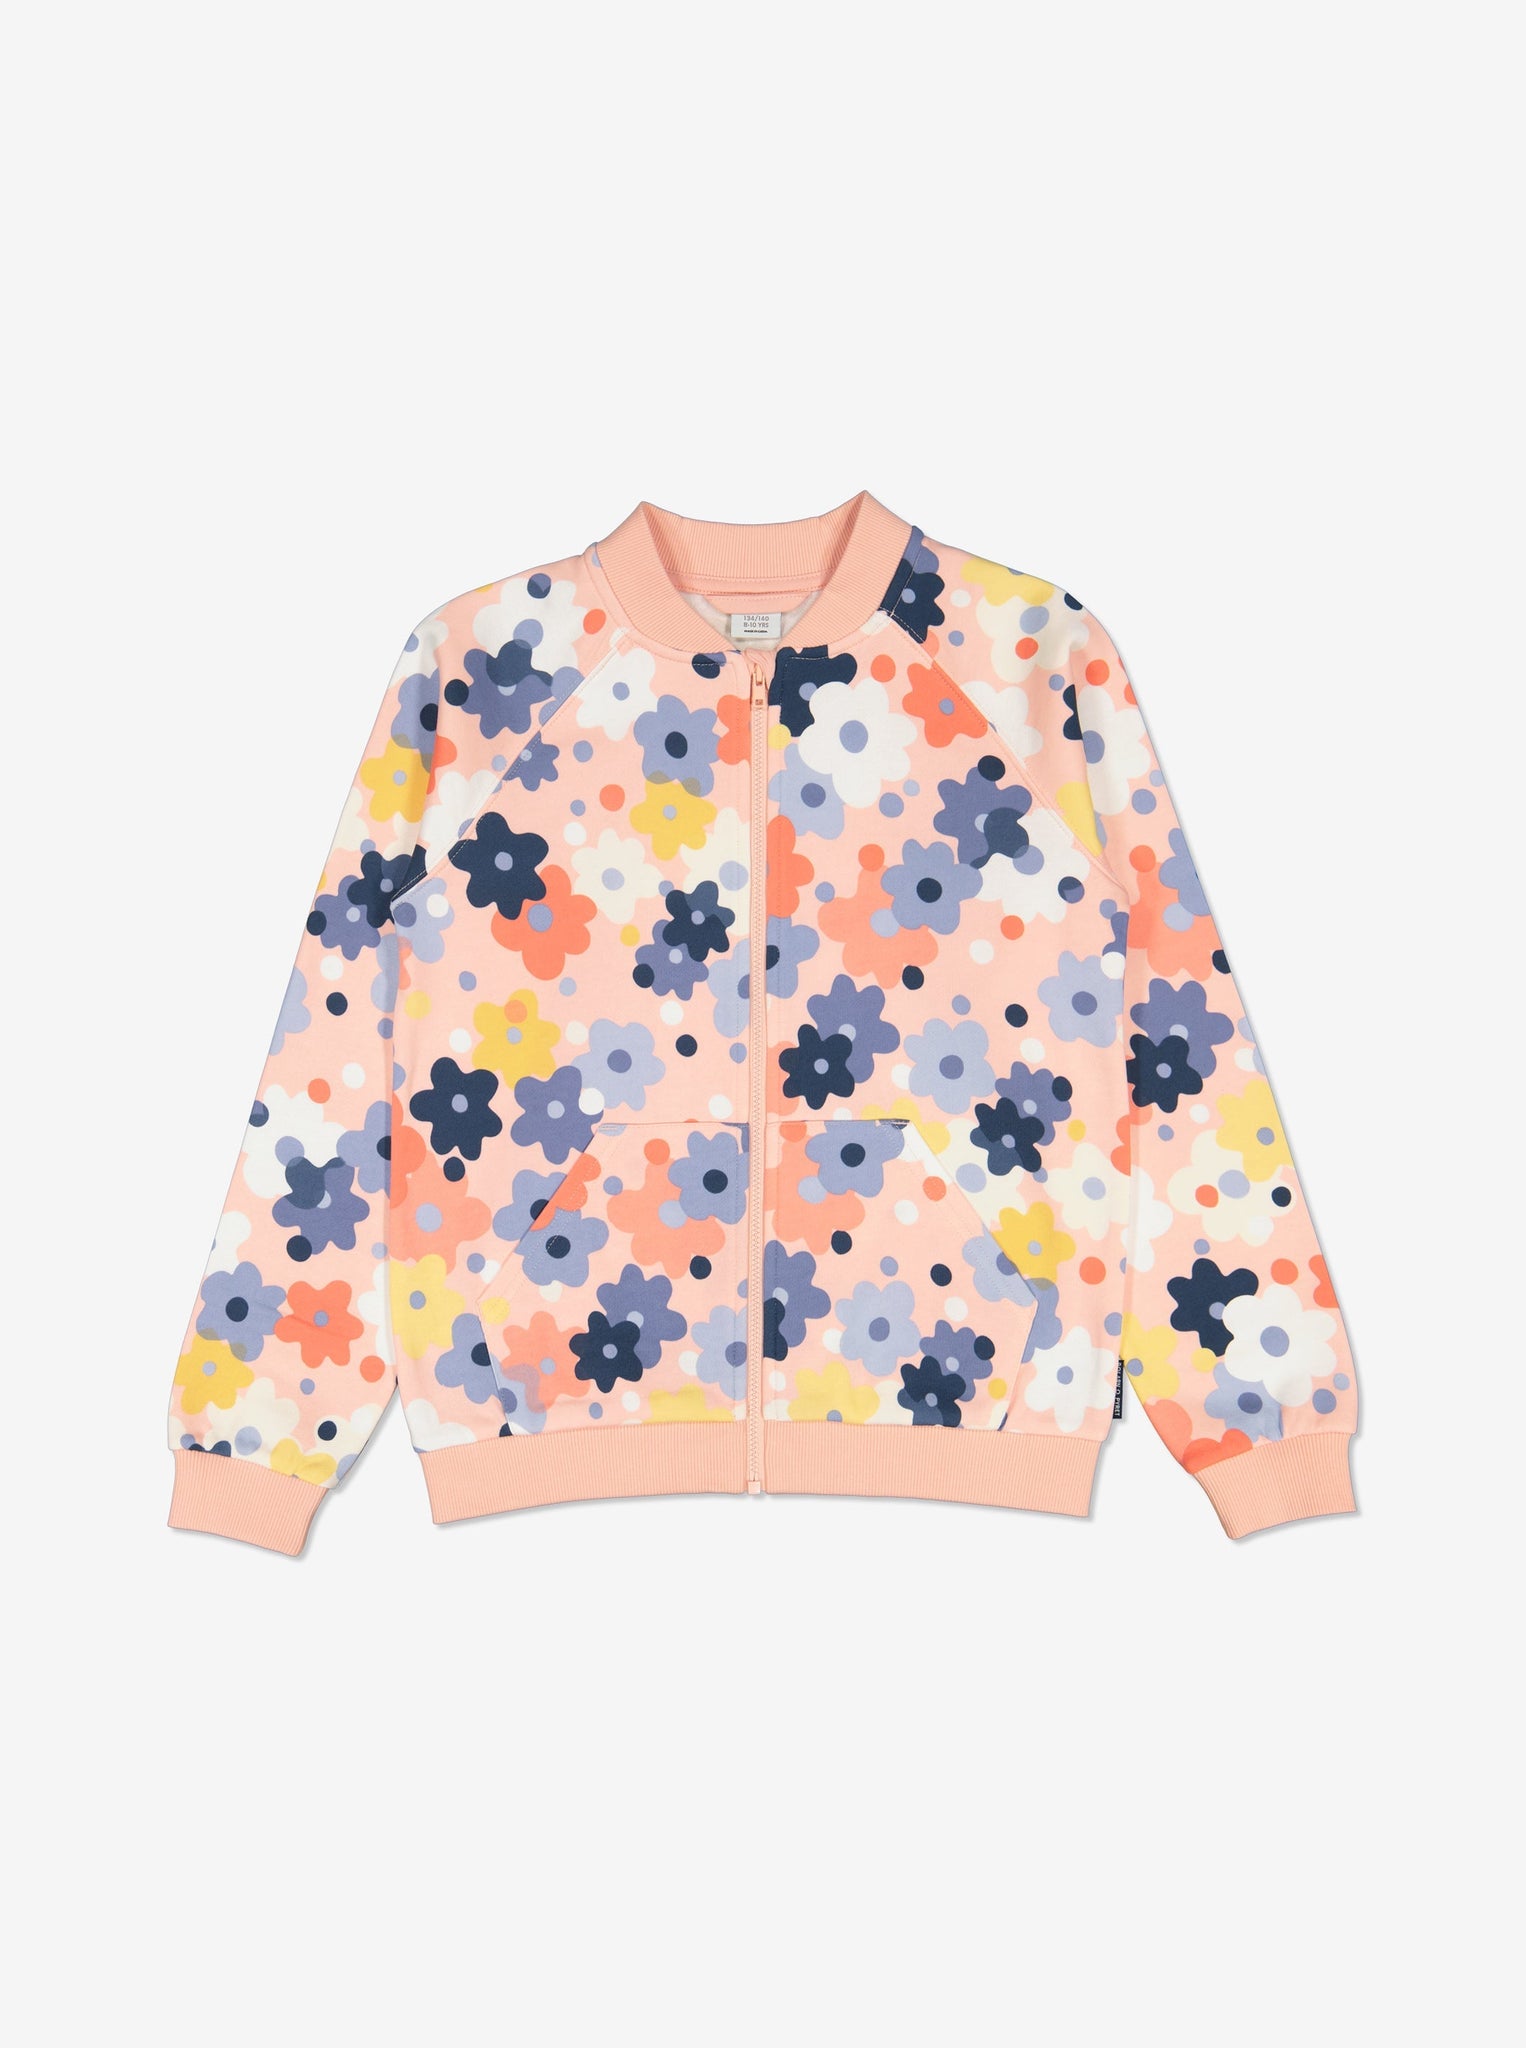 Floral Print Girls  Jacket from Polarn O. Pyret Kidswear. Made from 100% GOTS Organic Cotton.